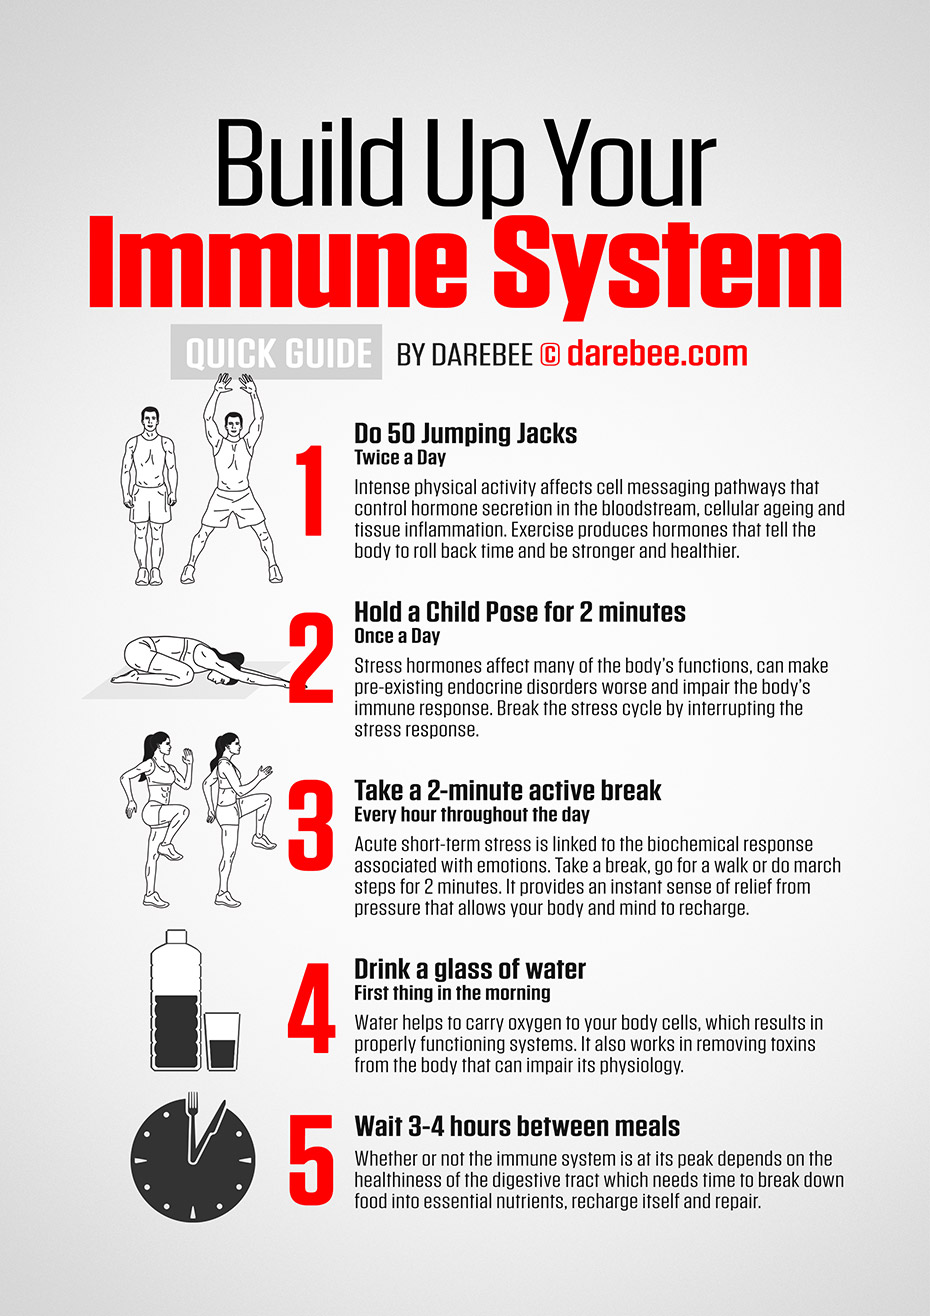 Quick Morning Workout That Can Boost Your Immune System - Educogym